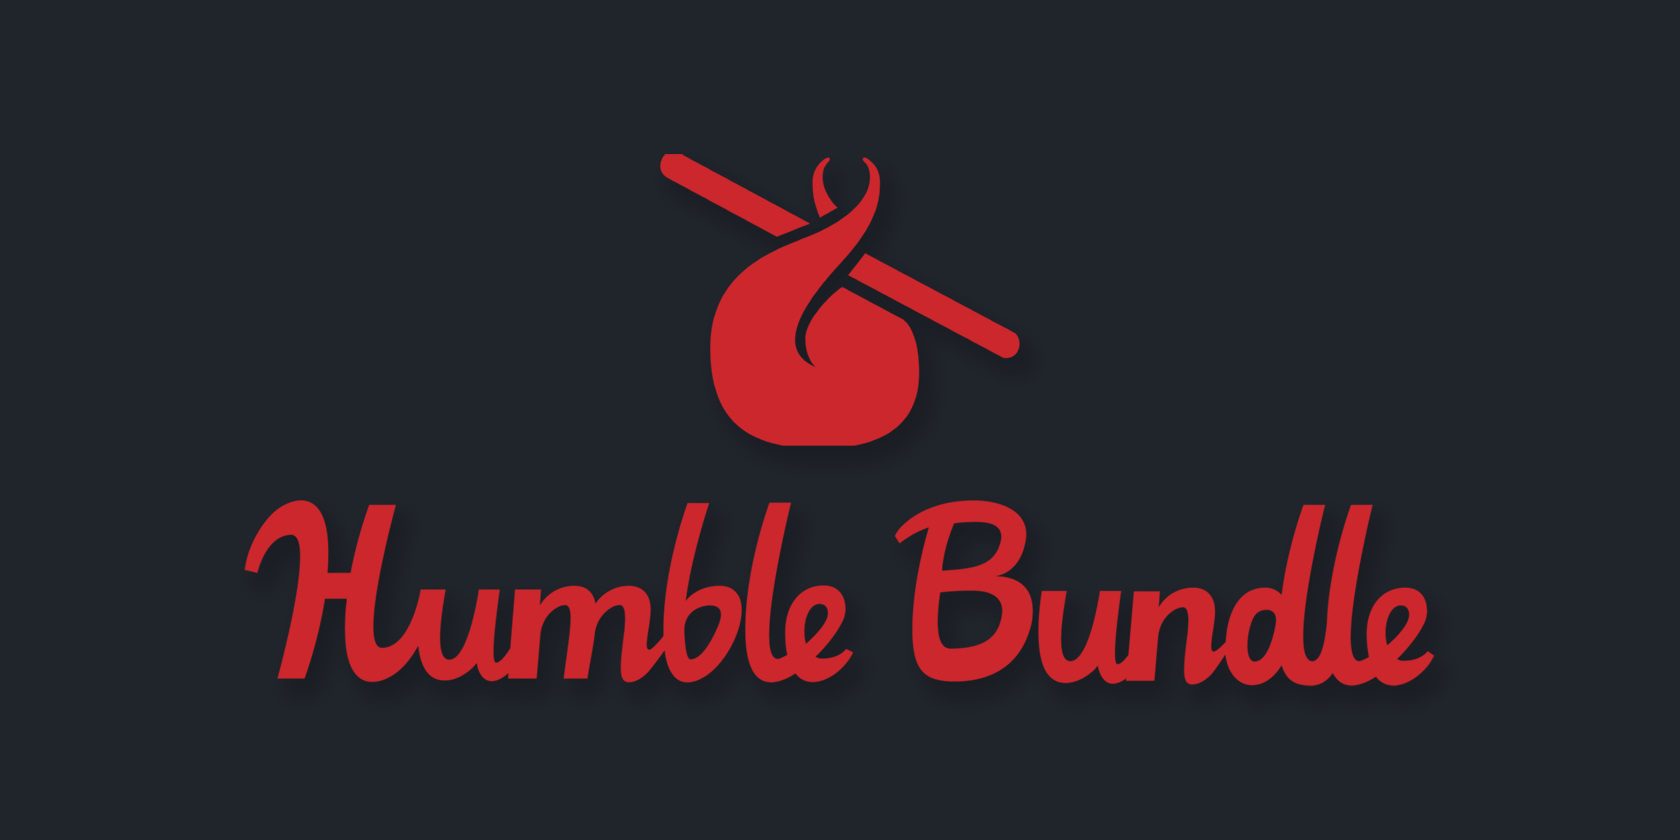 Humble Bundle rolling out a redesigned slider system following backlash